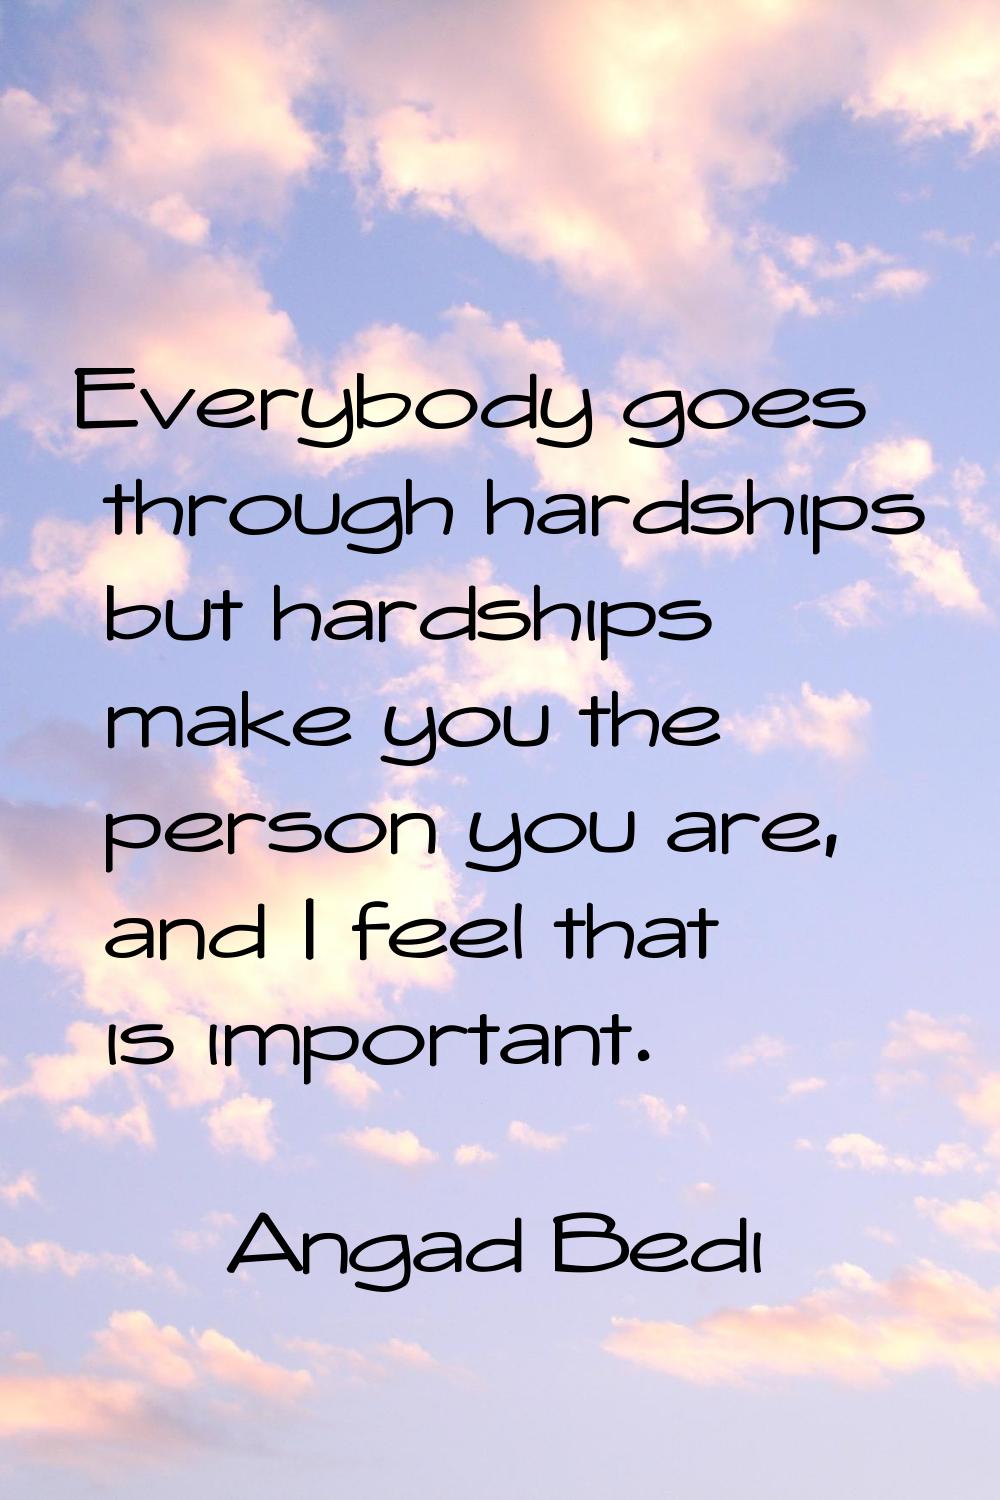 Everybody goes through hardships but hardships make you the person you are, and I feel that is impo